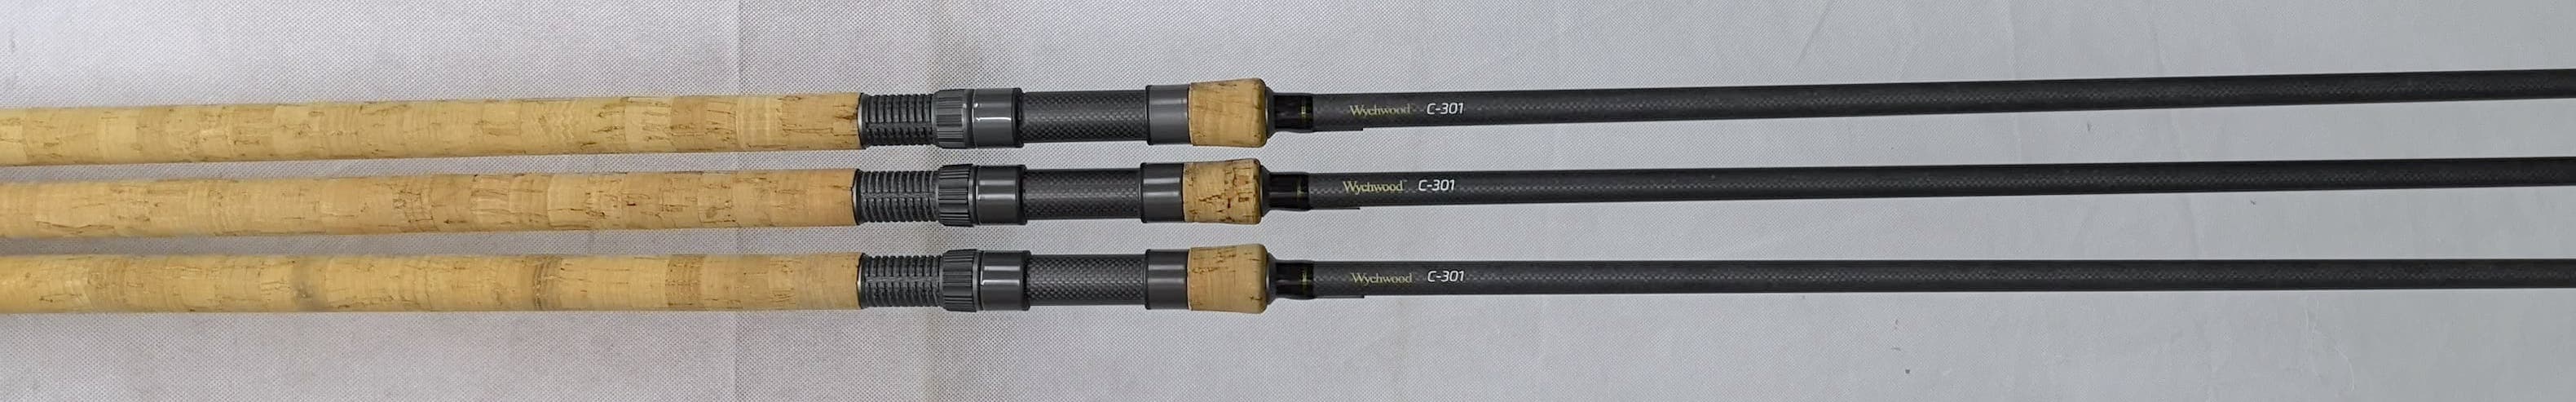 Wychwood C301 12ft 3.00lb Cork Carp Rods X3 *Ex-Display* – Fish For Tackle